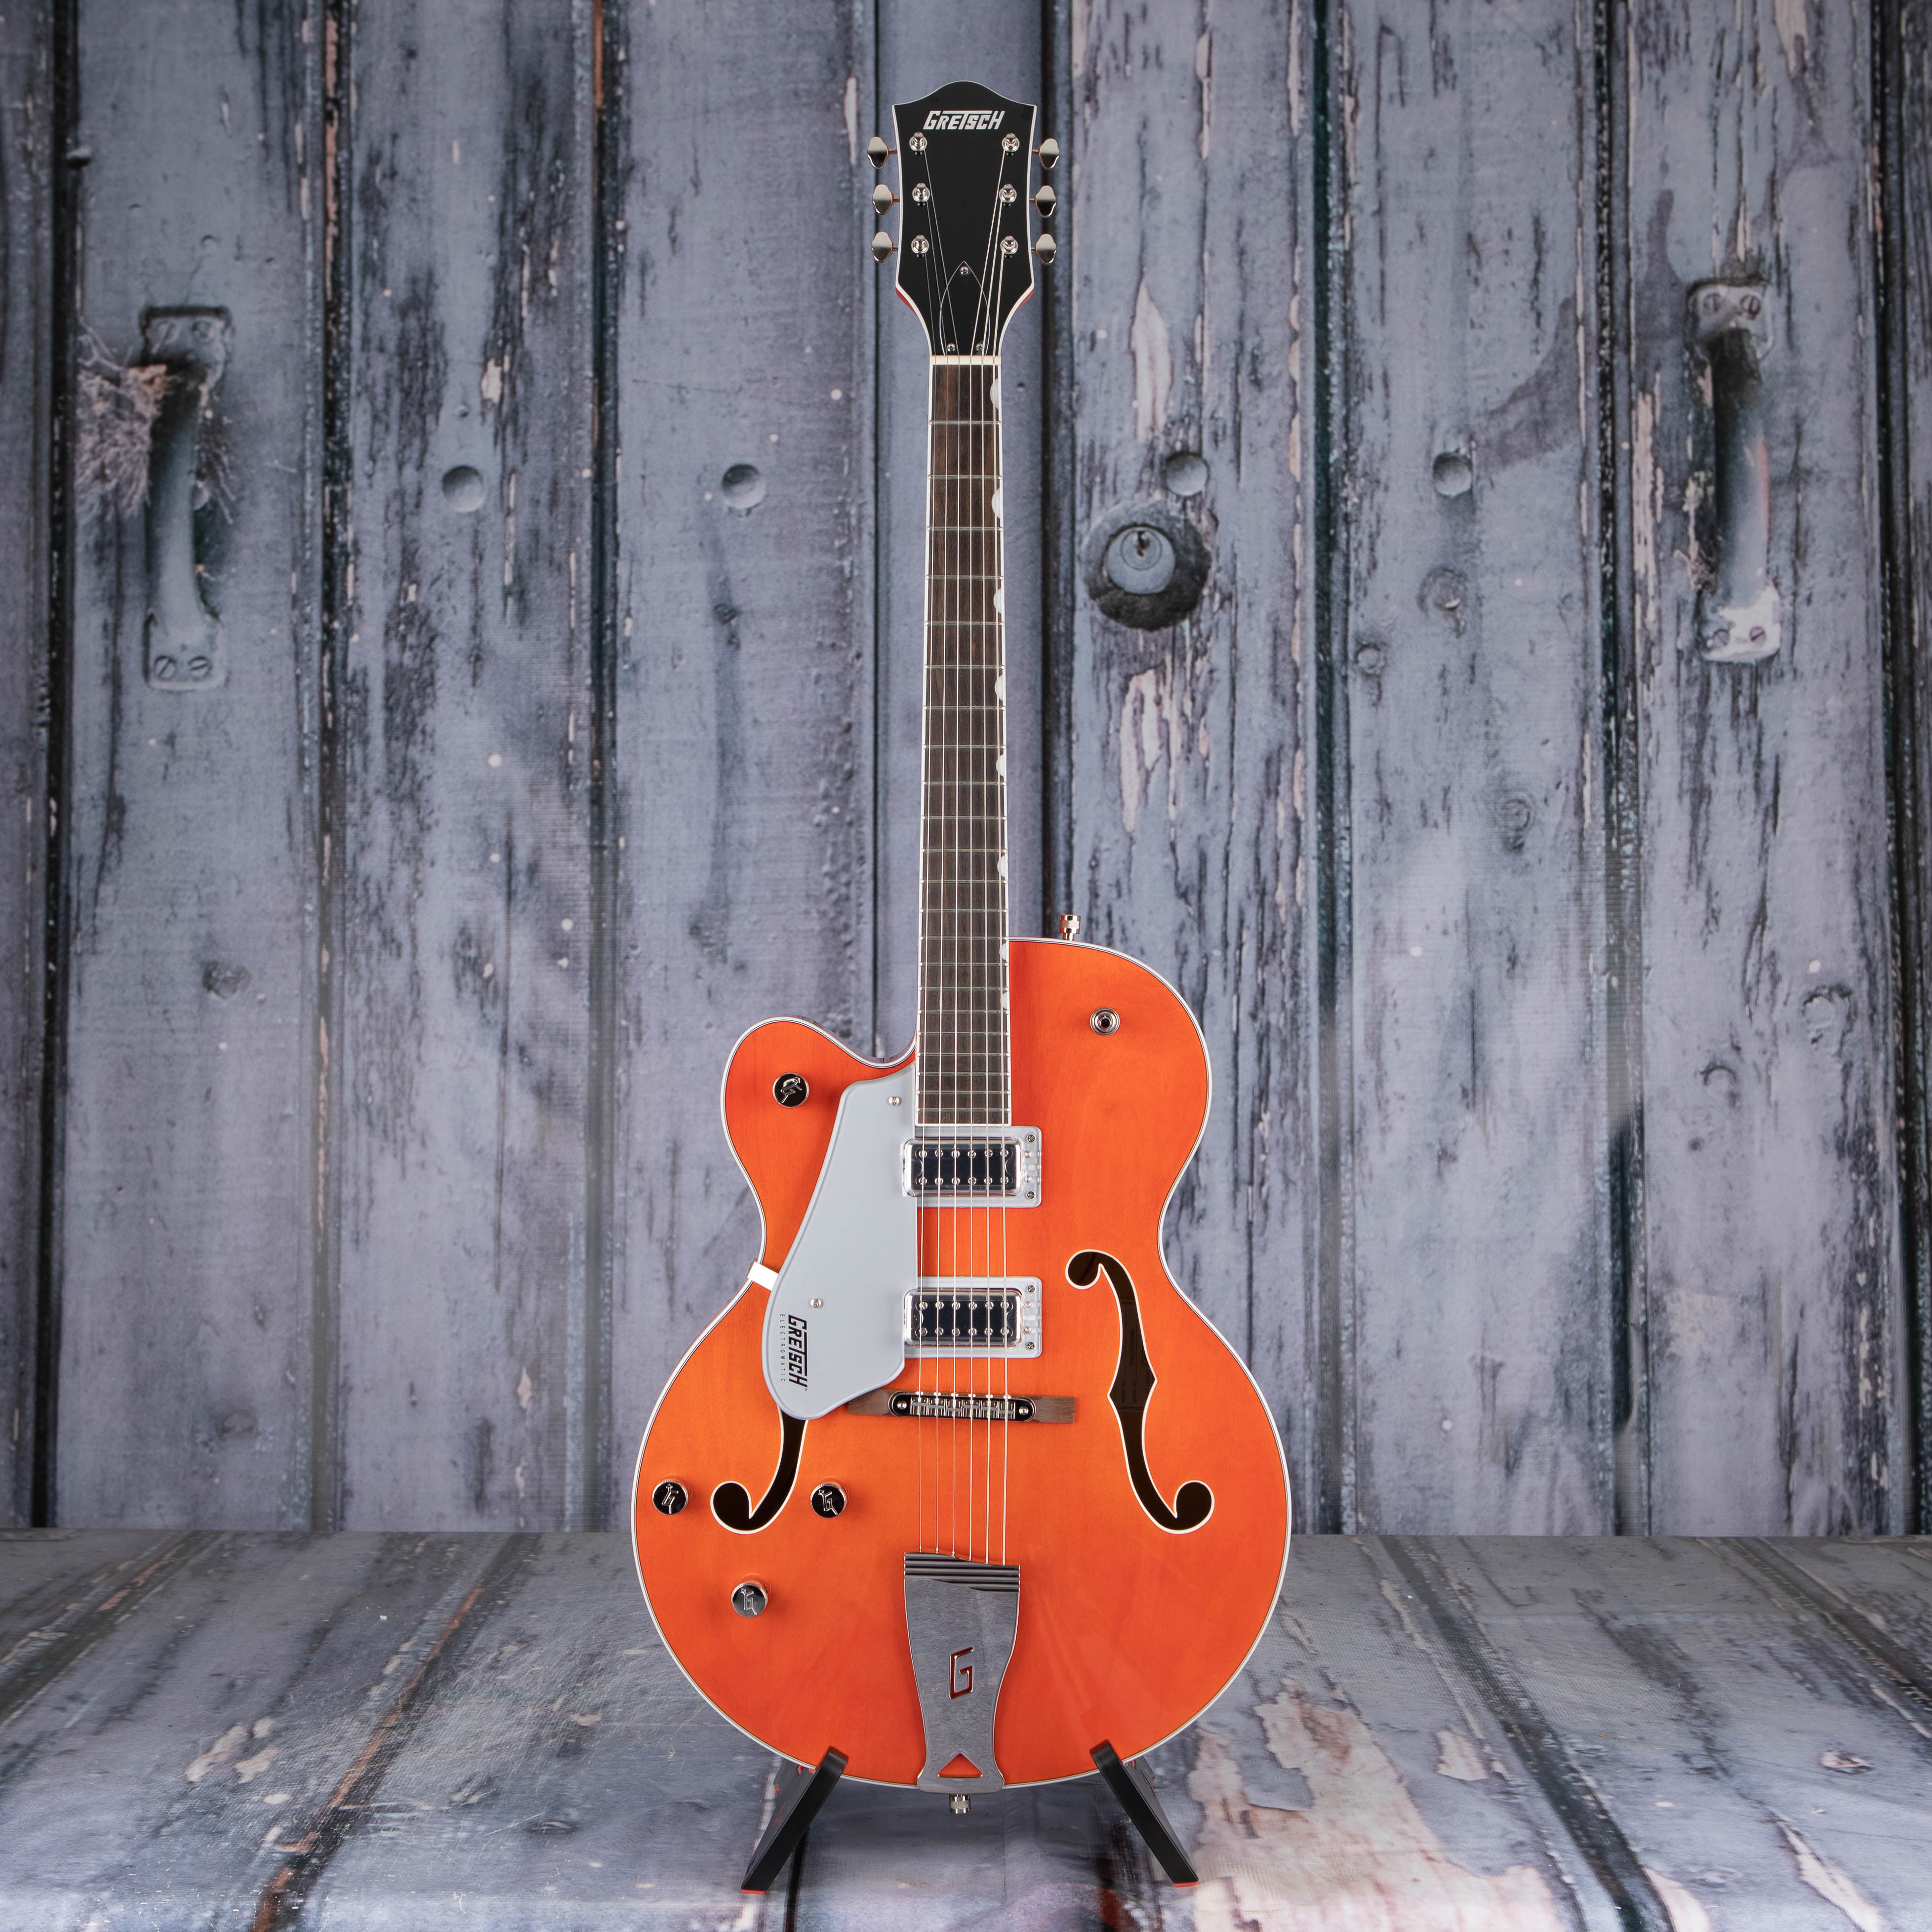 Gretsch G5420LH Electromatic Classic Hollow Body Single-Cut Left-Handed Guitar, Orange Stain, front